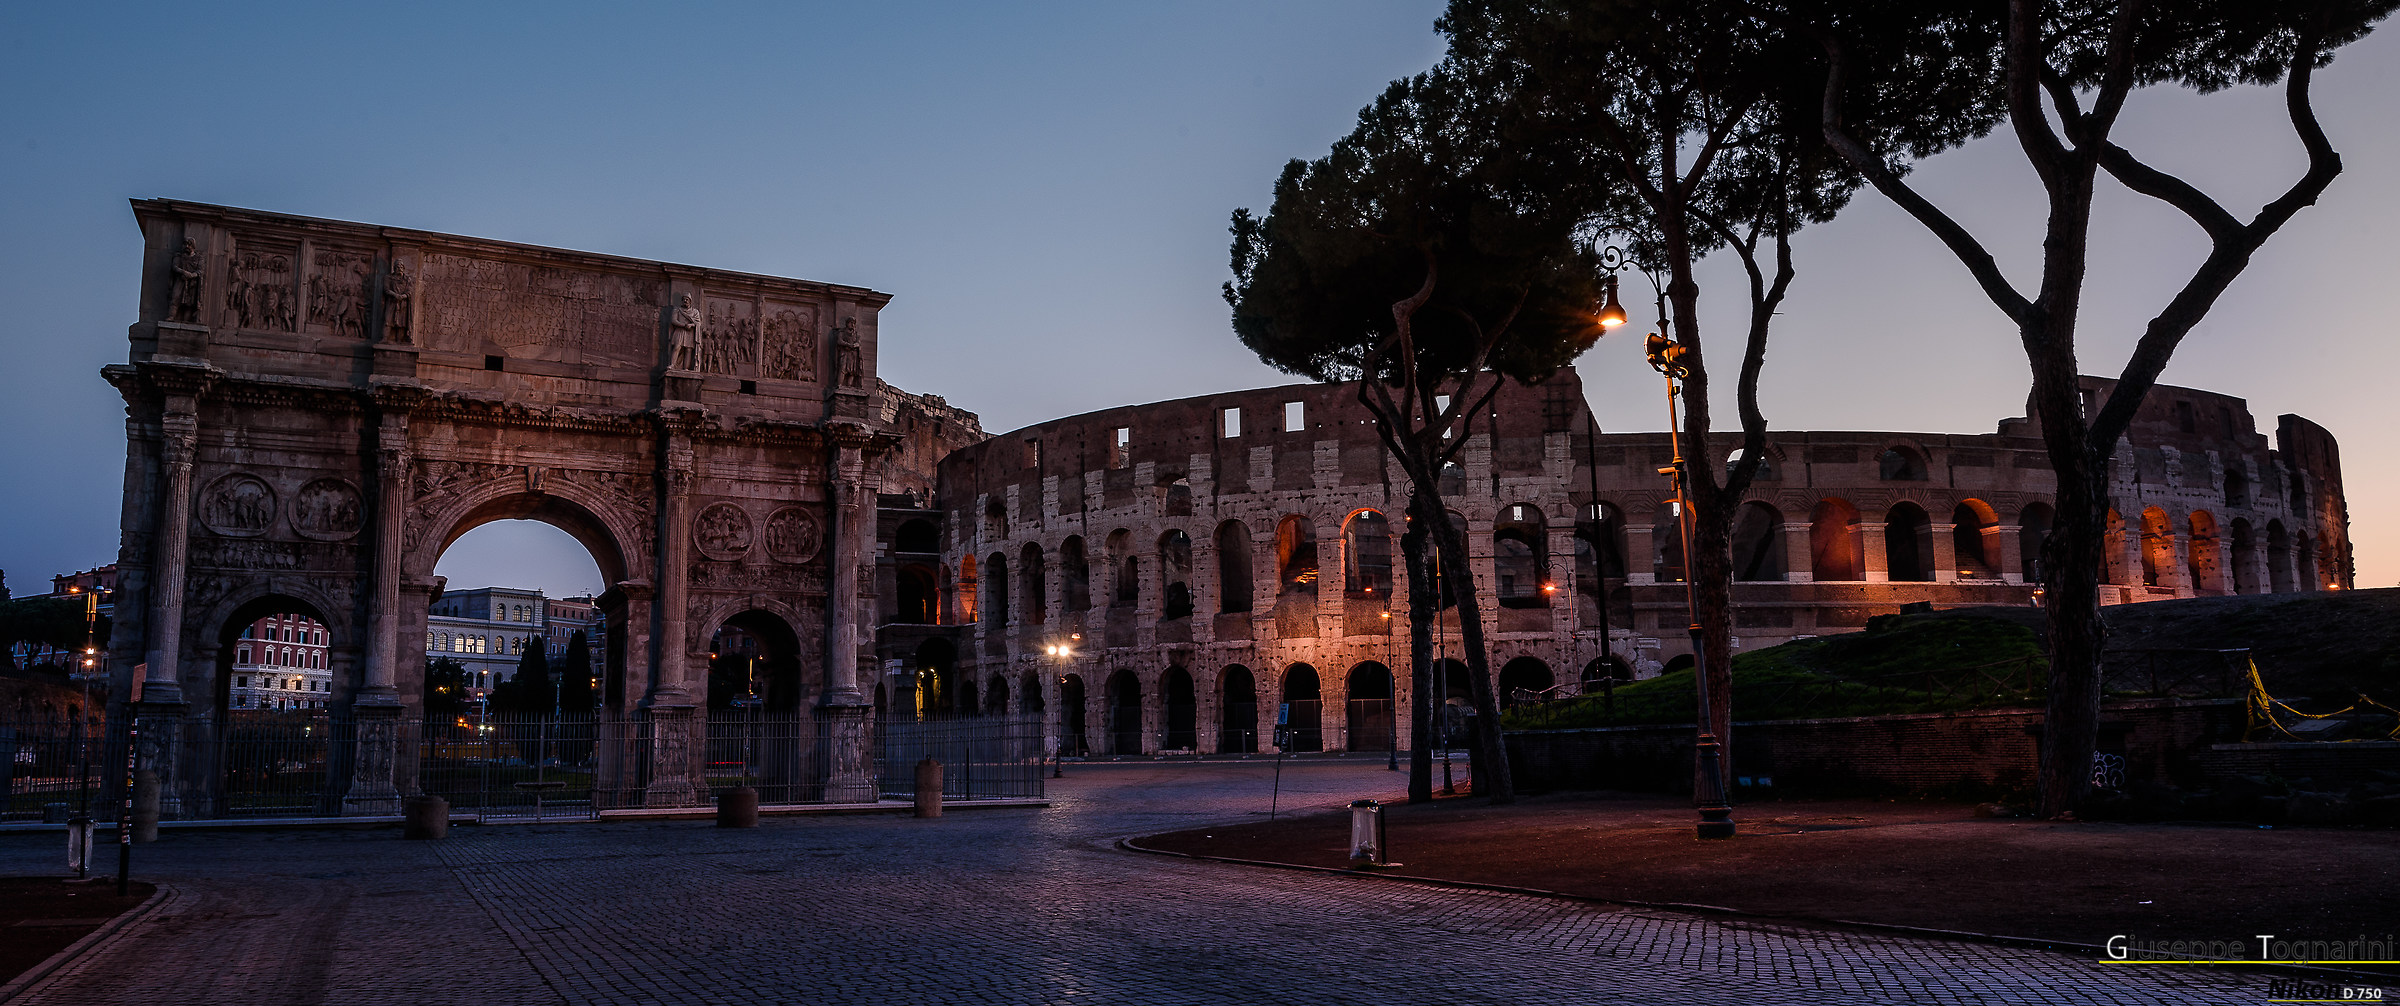 Sunrise at the Colosseum...